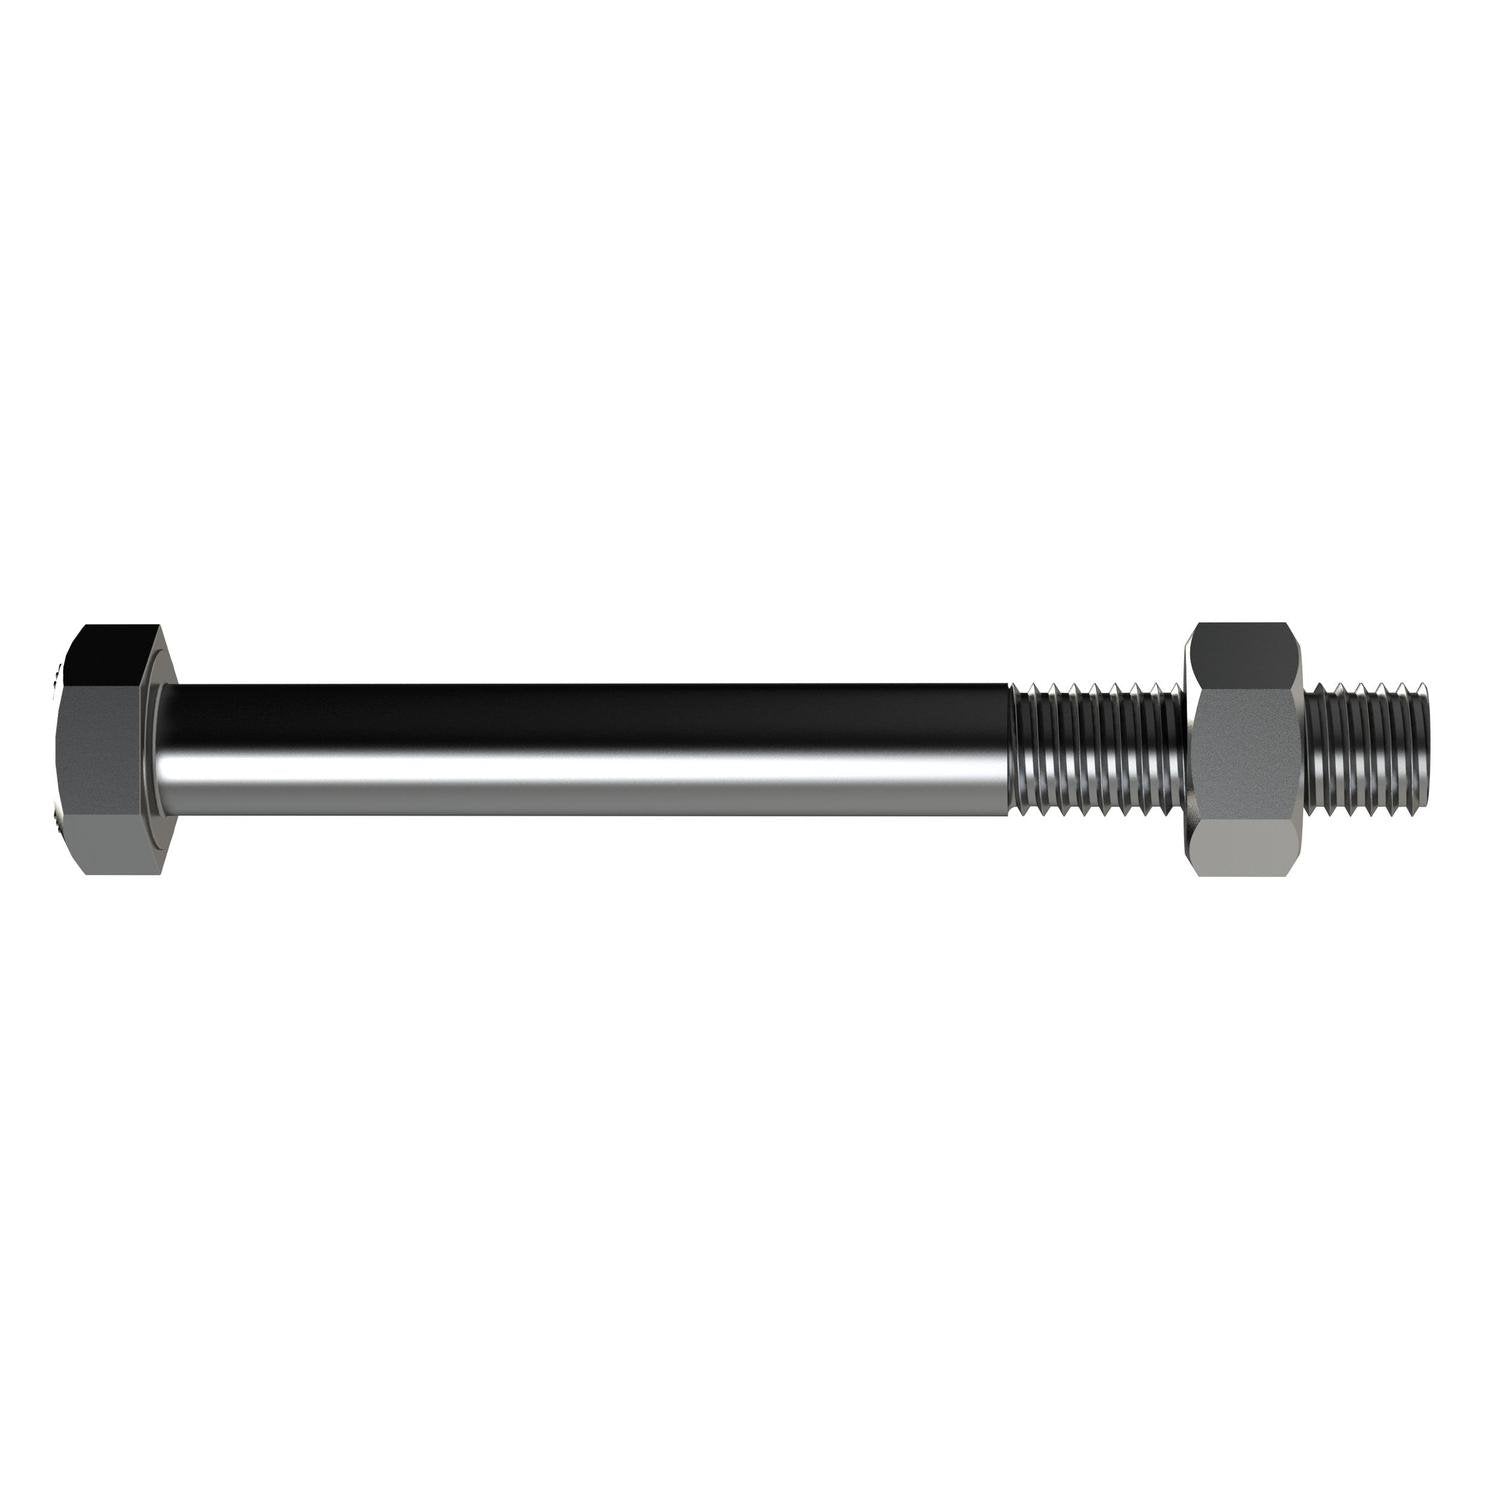 Bremick Engineer Bolt & Nut M12 X 200Mm Stainless Steel